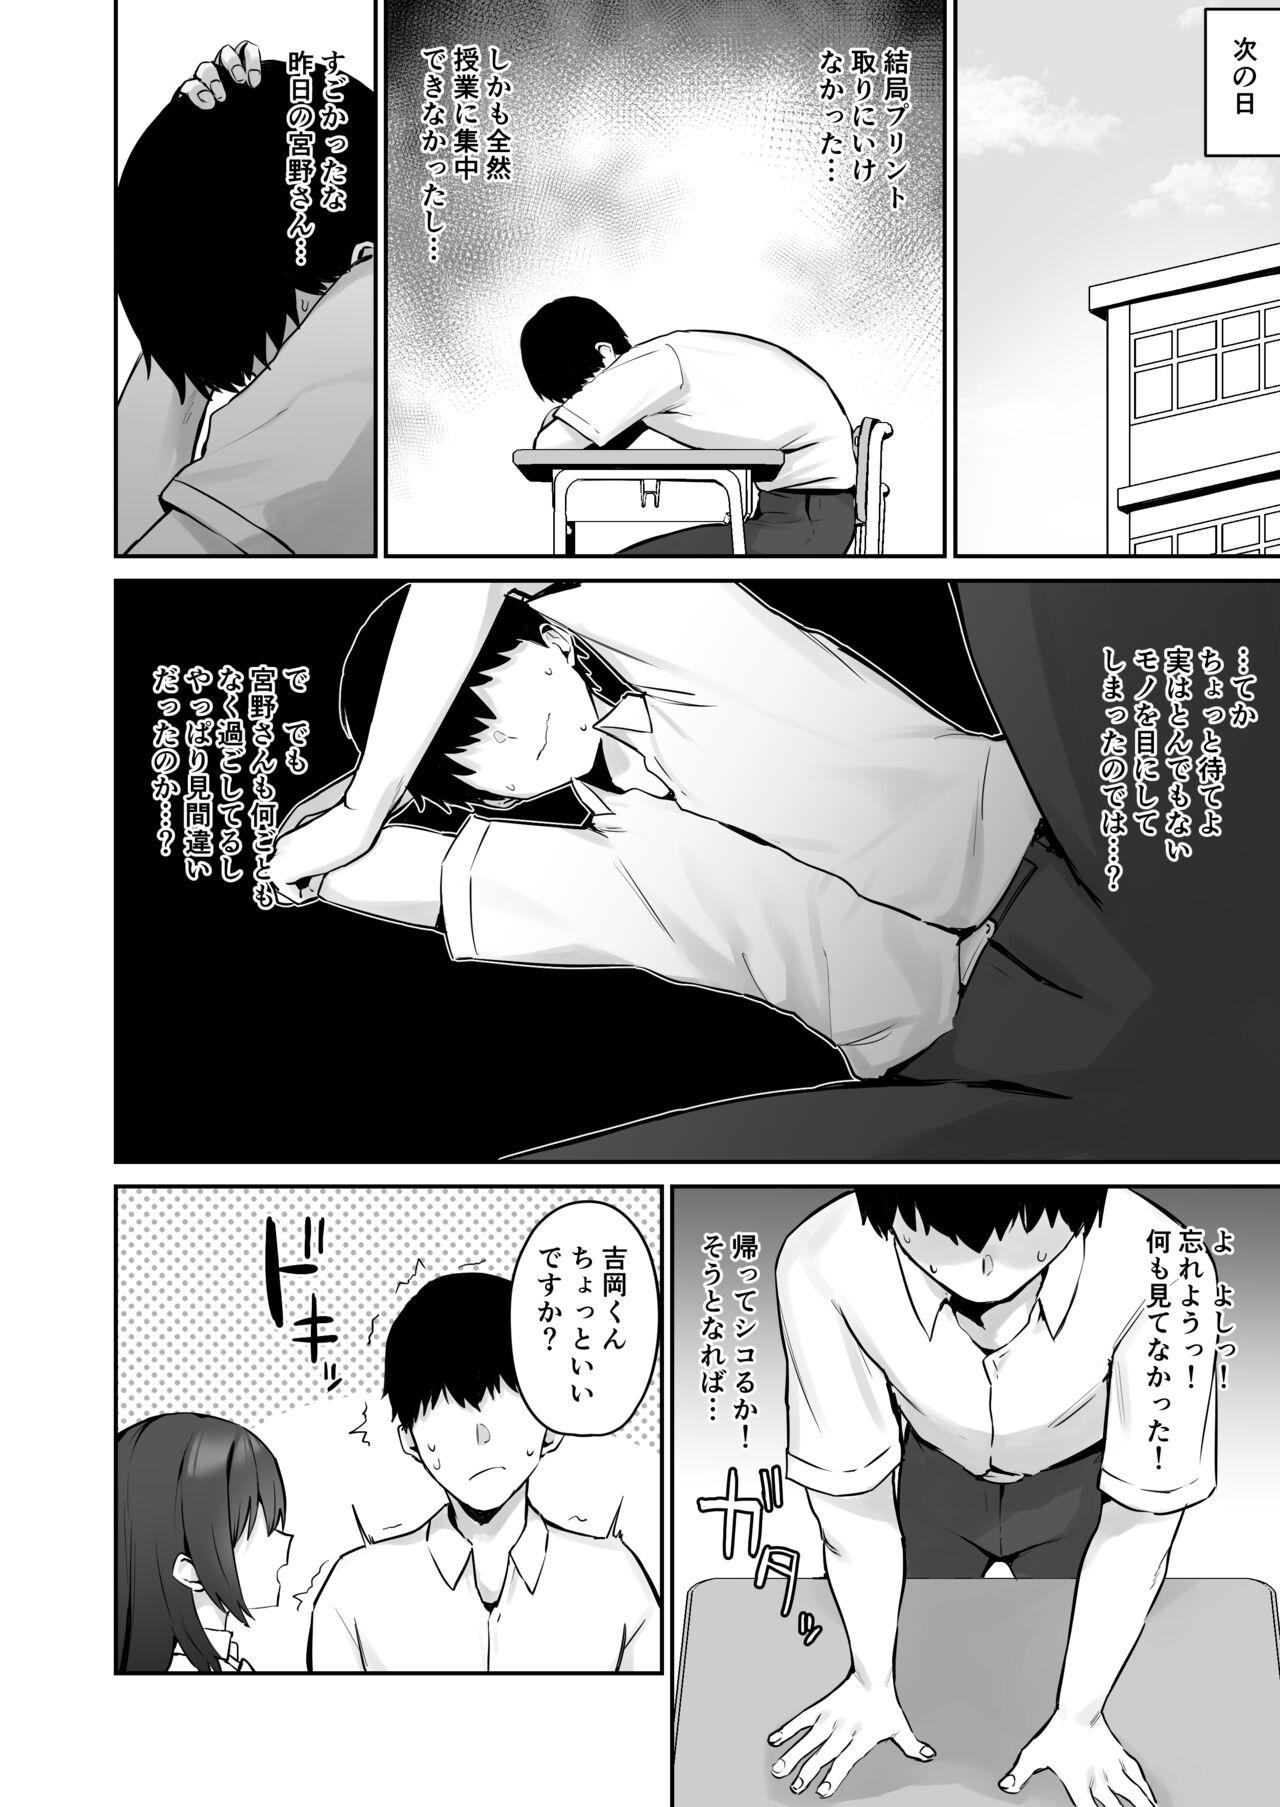 Young Men 真面目ですが、なにか? Lingerie - Page 7